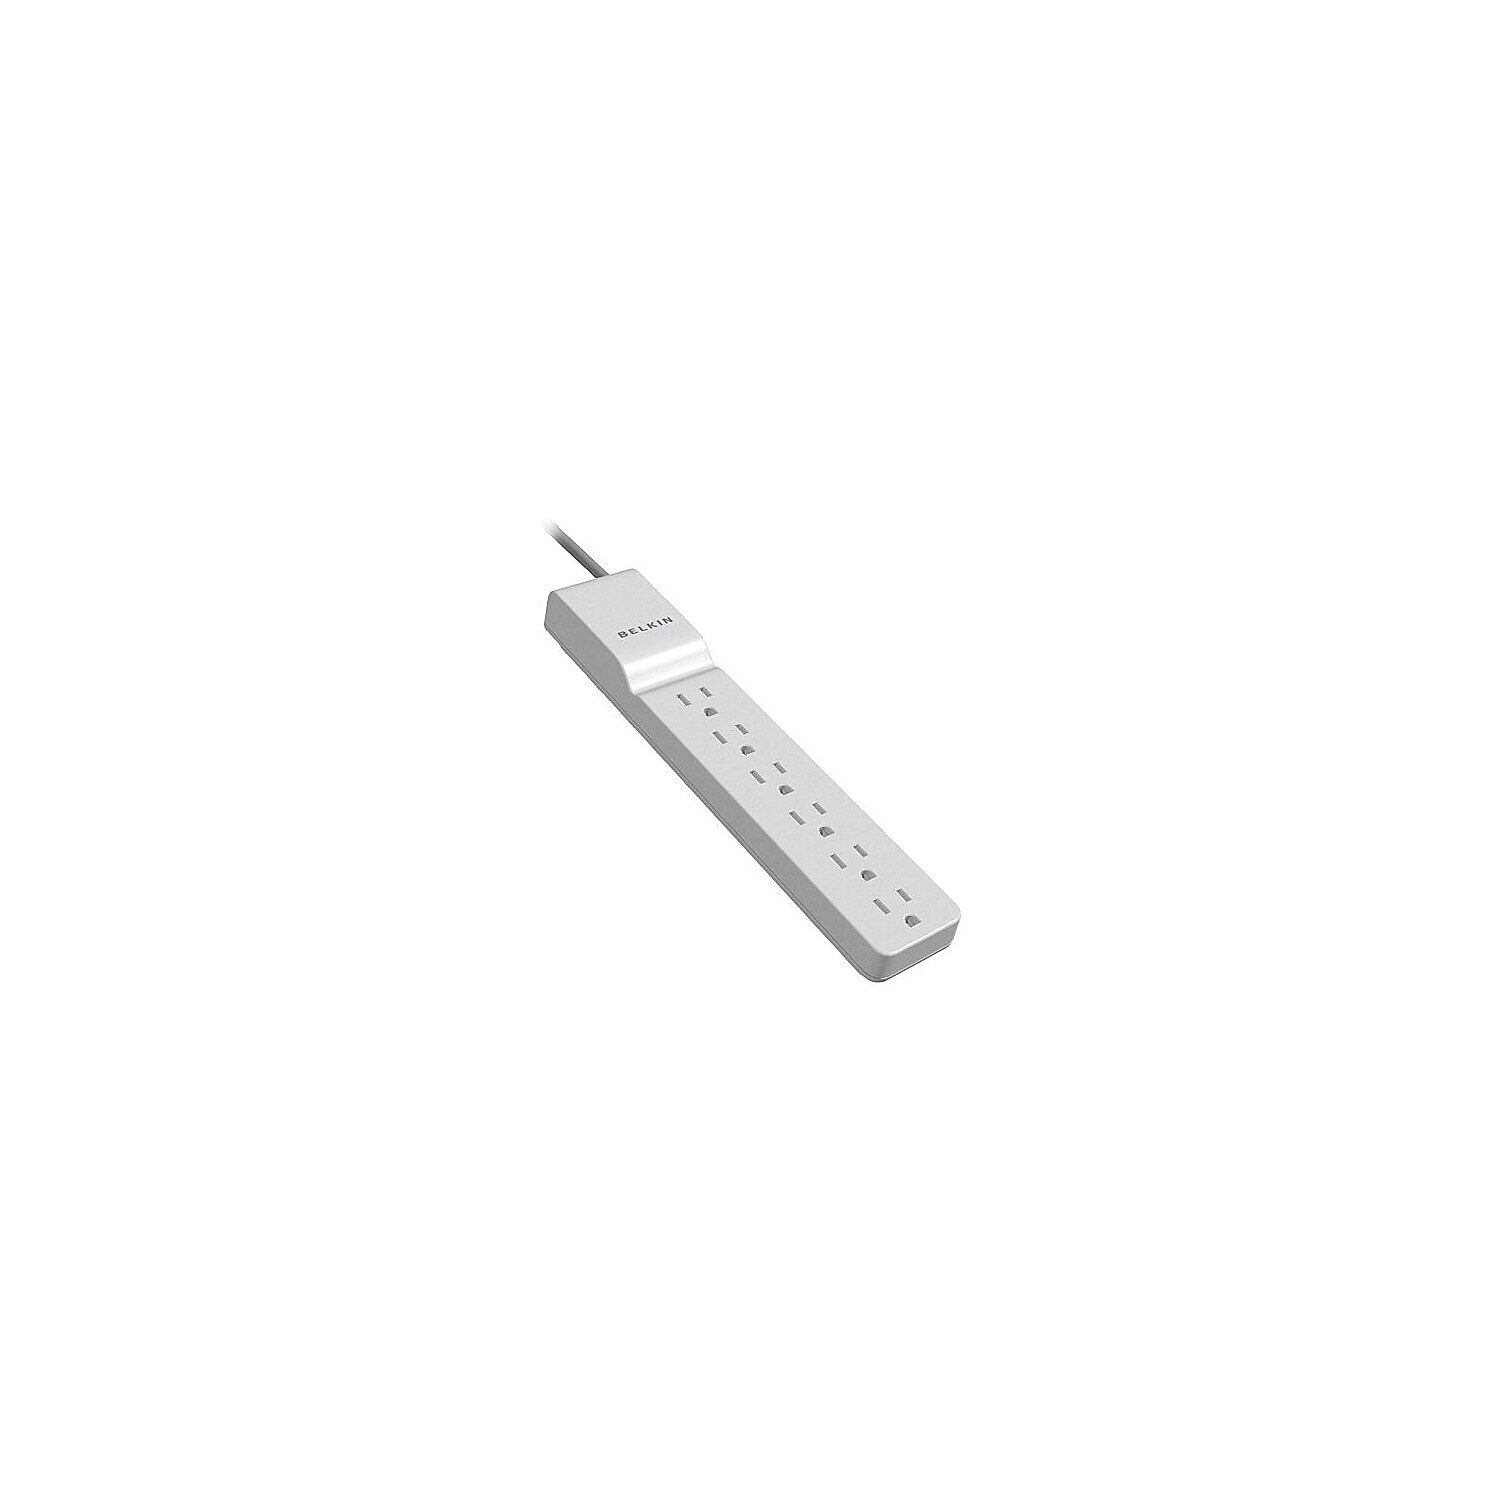 Belkin Home/Office Surge Protector 6 Outlets 10 ft Cord 720 Joules White